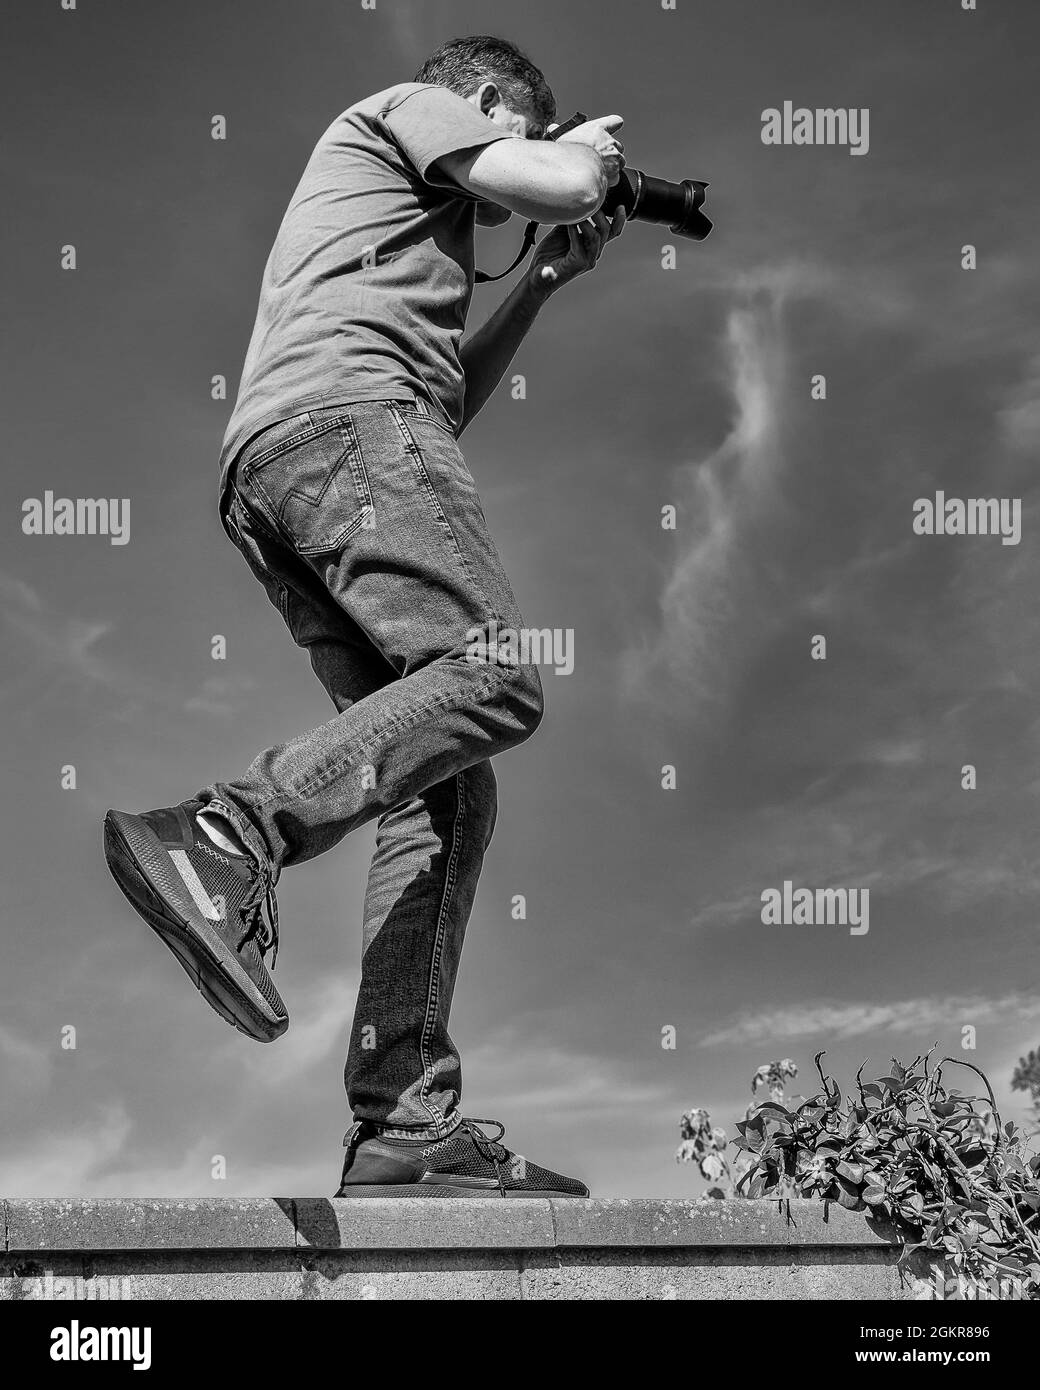 A photographer balances precariously on one leg as he takes a photo from above a narrow wall, in black and white Stock Photo